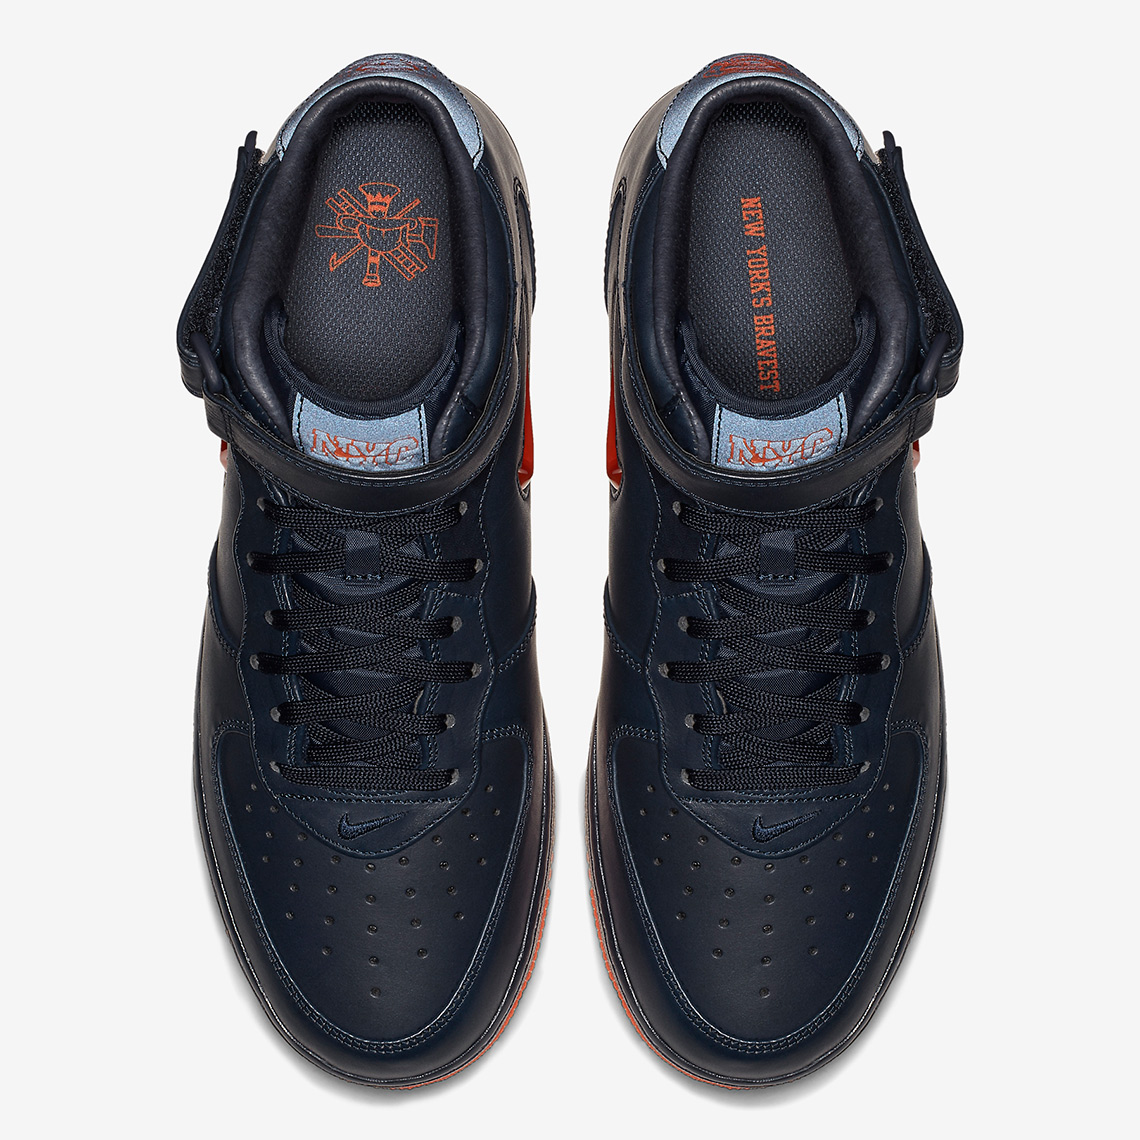 This New York Knicks-Inspired Nike Air Force 1 '07 Drops This Week -  WearTesters